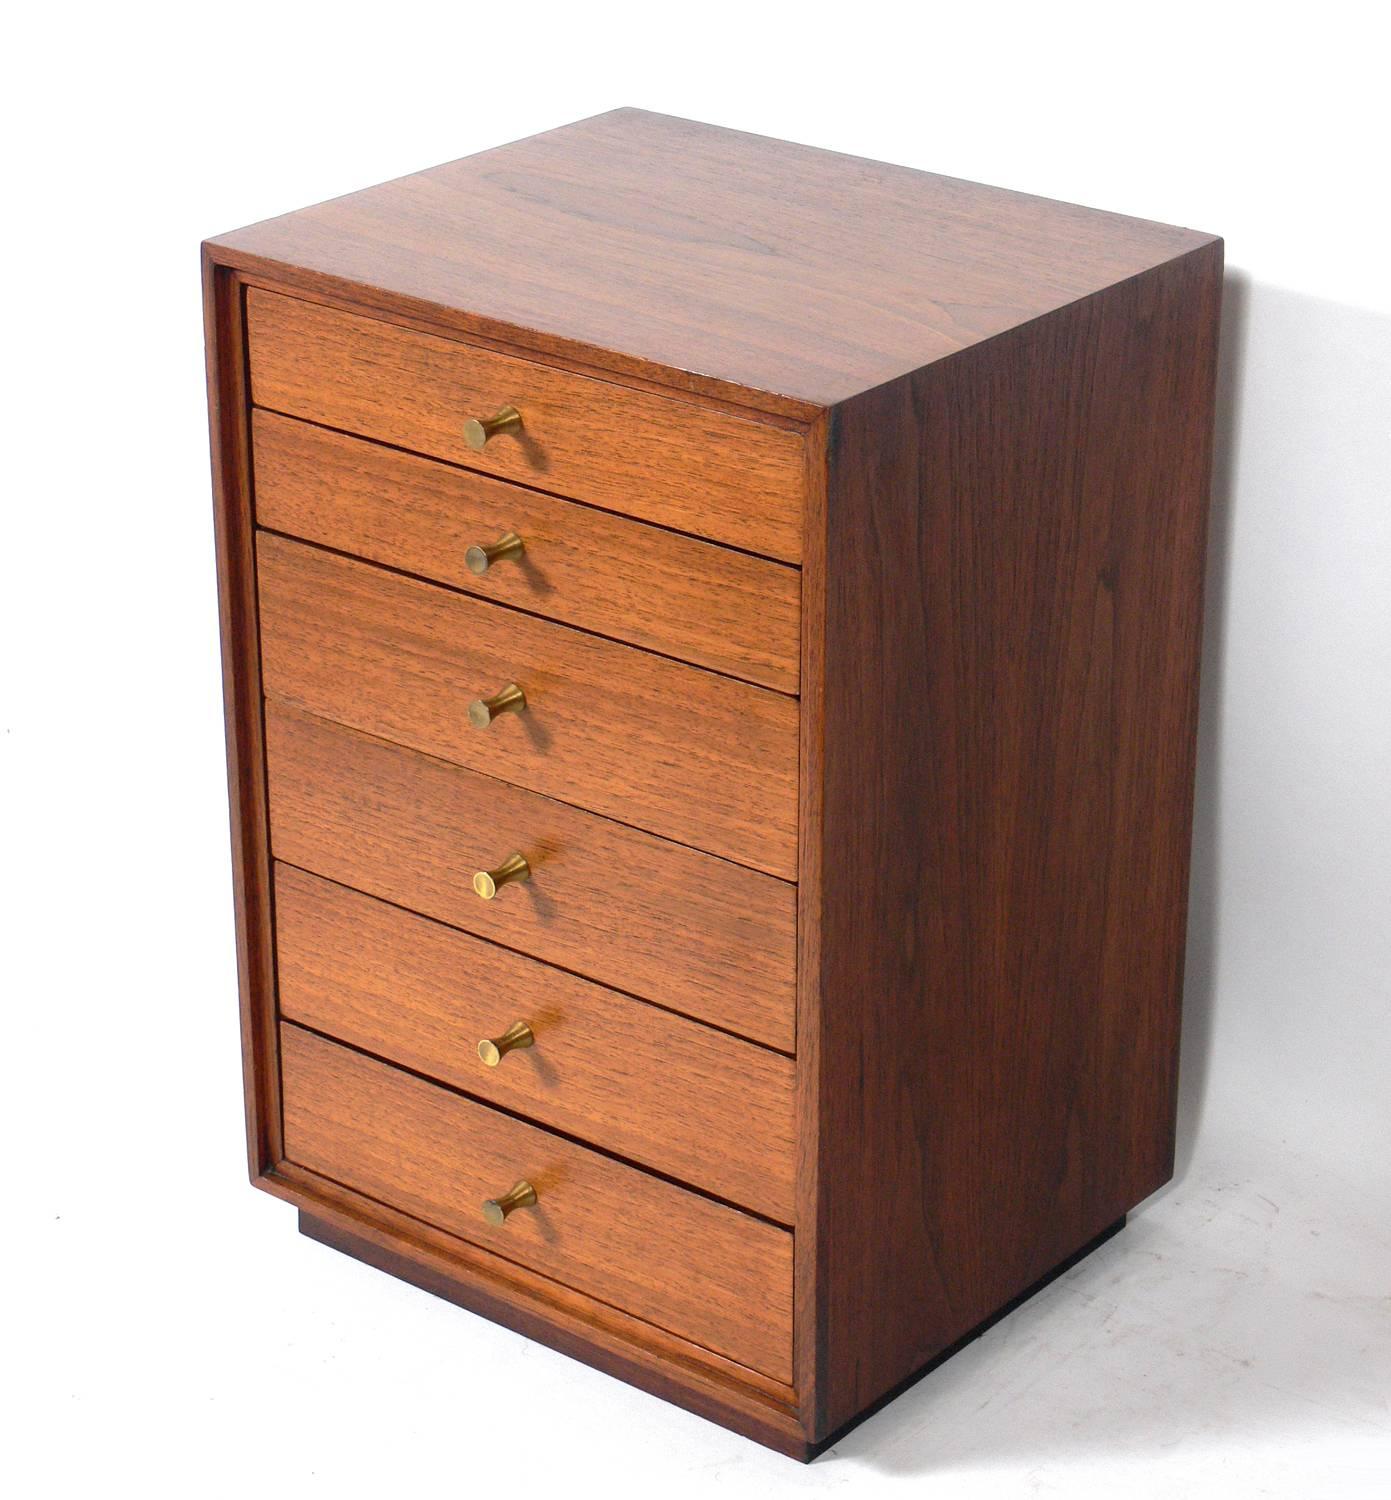 Paul McCobb style jewelry box or chest, American, circa 1950s. This petite semainier chest is a versatile size and can hold your jewelry, accessories, or unmentionables.